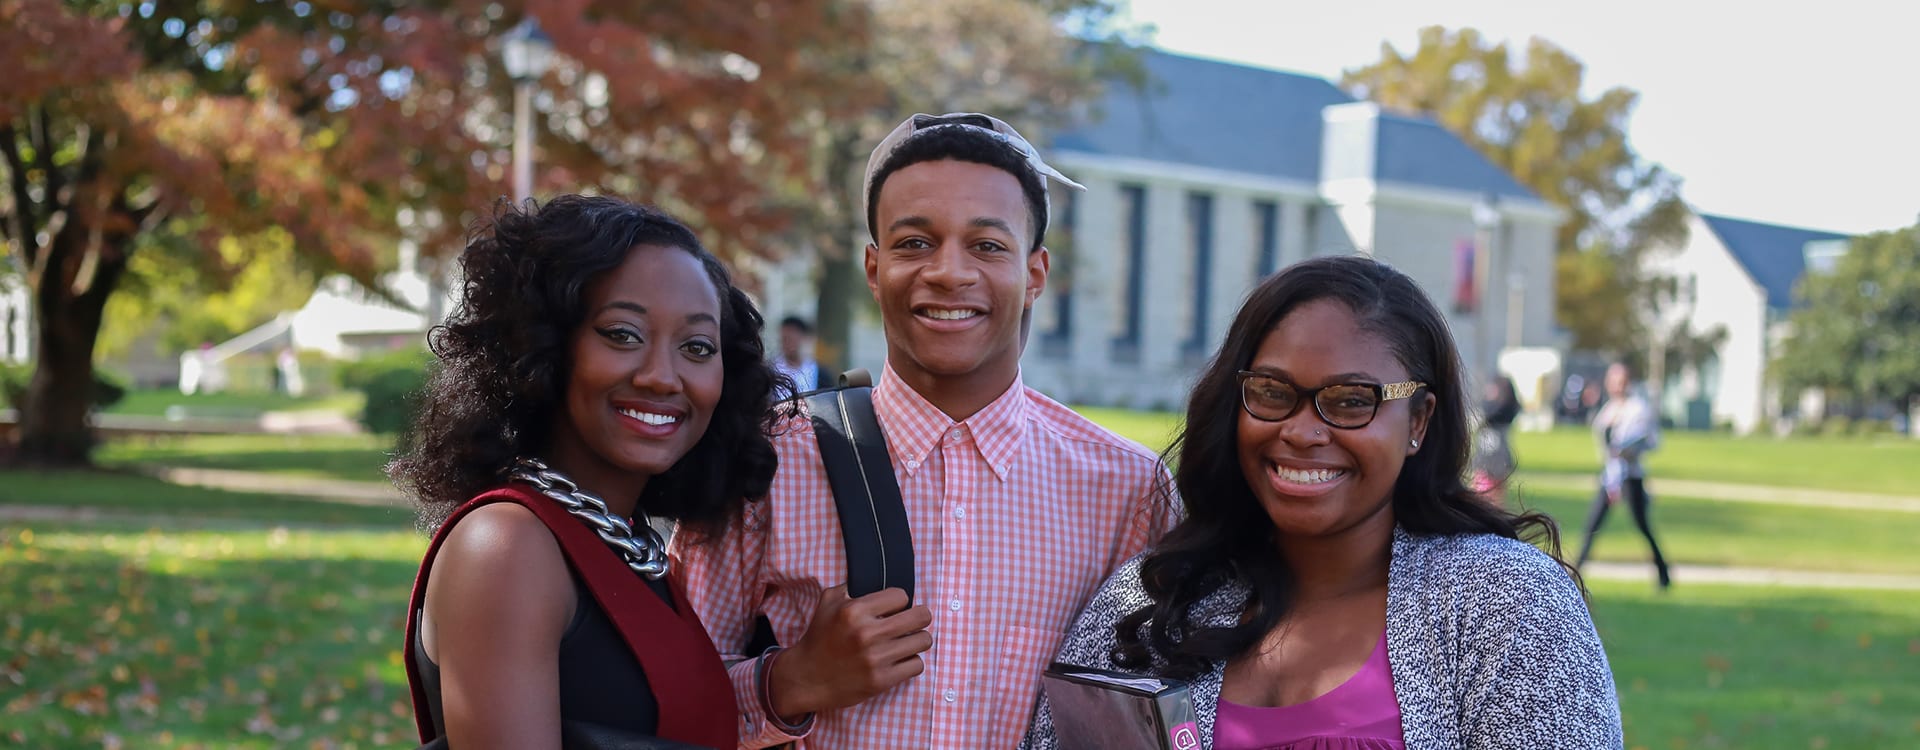 Virginia Union students smiling at the camera outside campus building